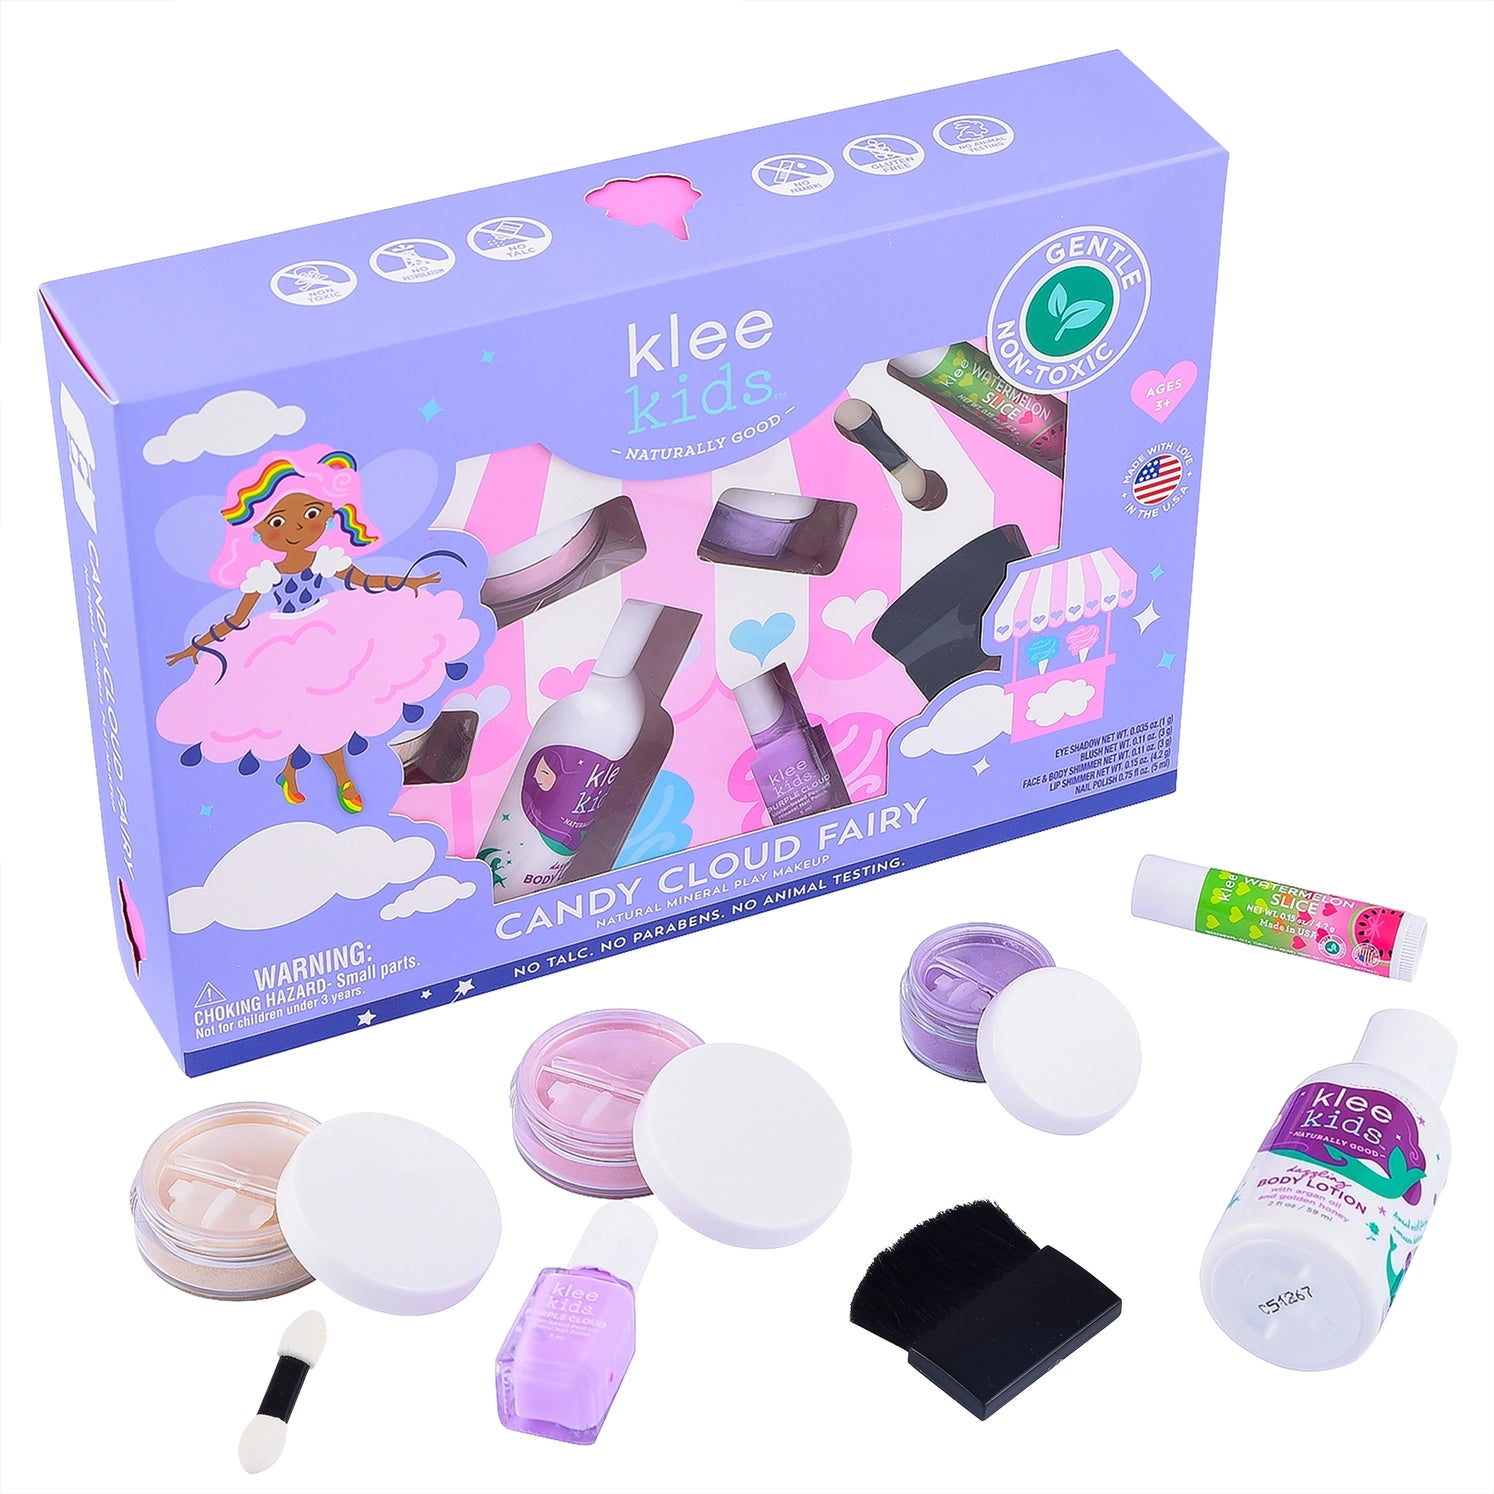 Candy Cloud Fairy - Klee Kids Natural Play Makeup 6-PC Kit - Twinkle Twinkle Little One